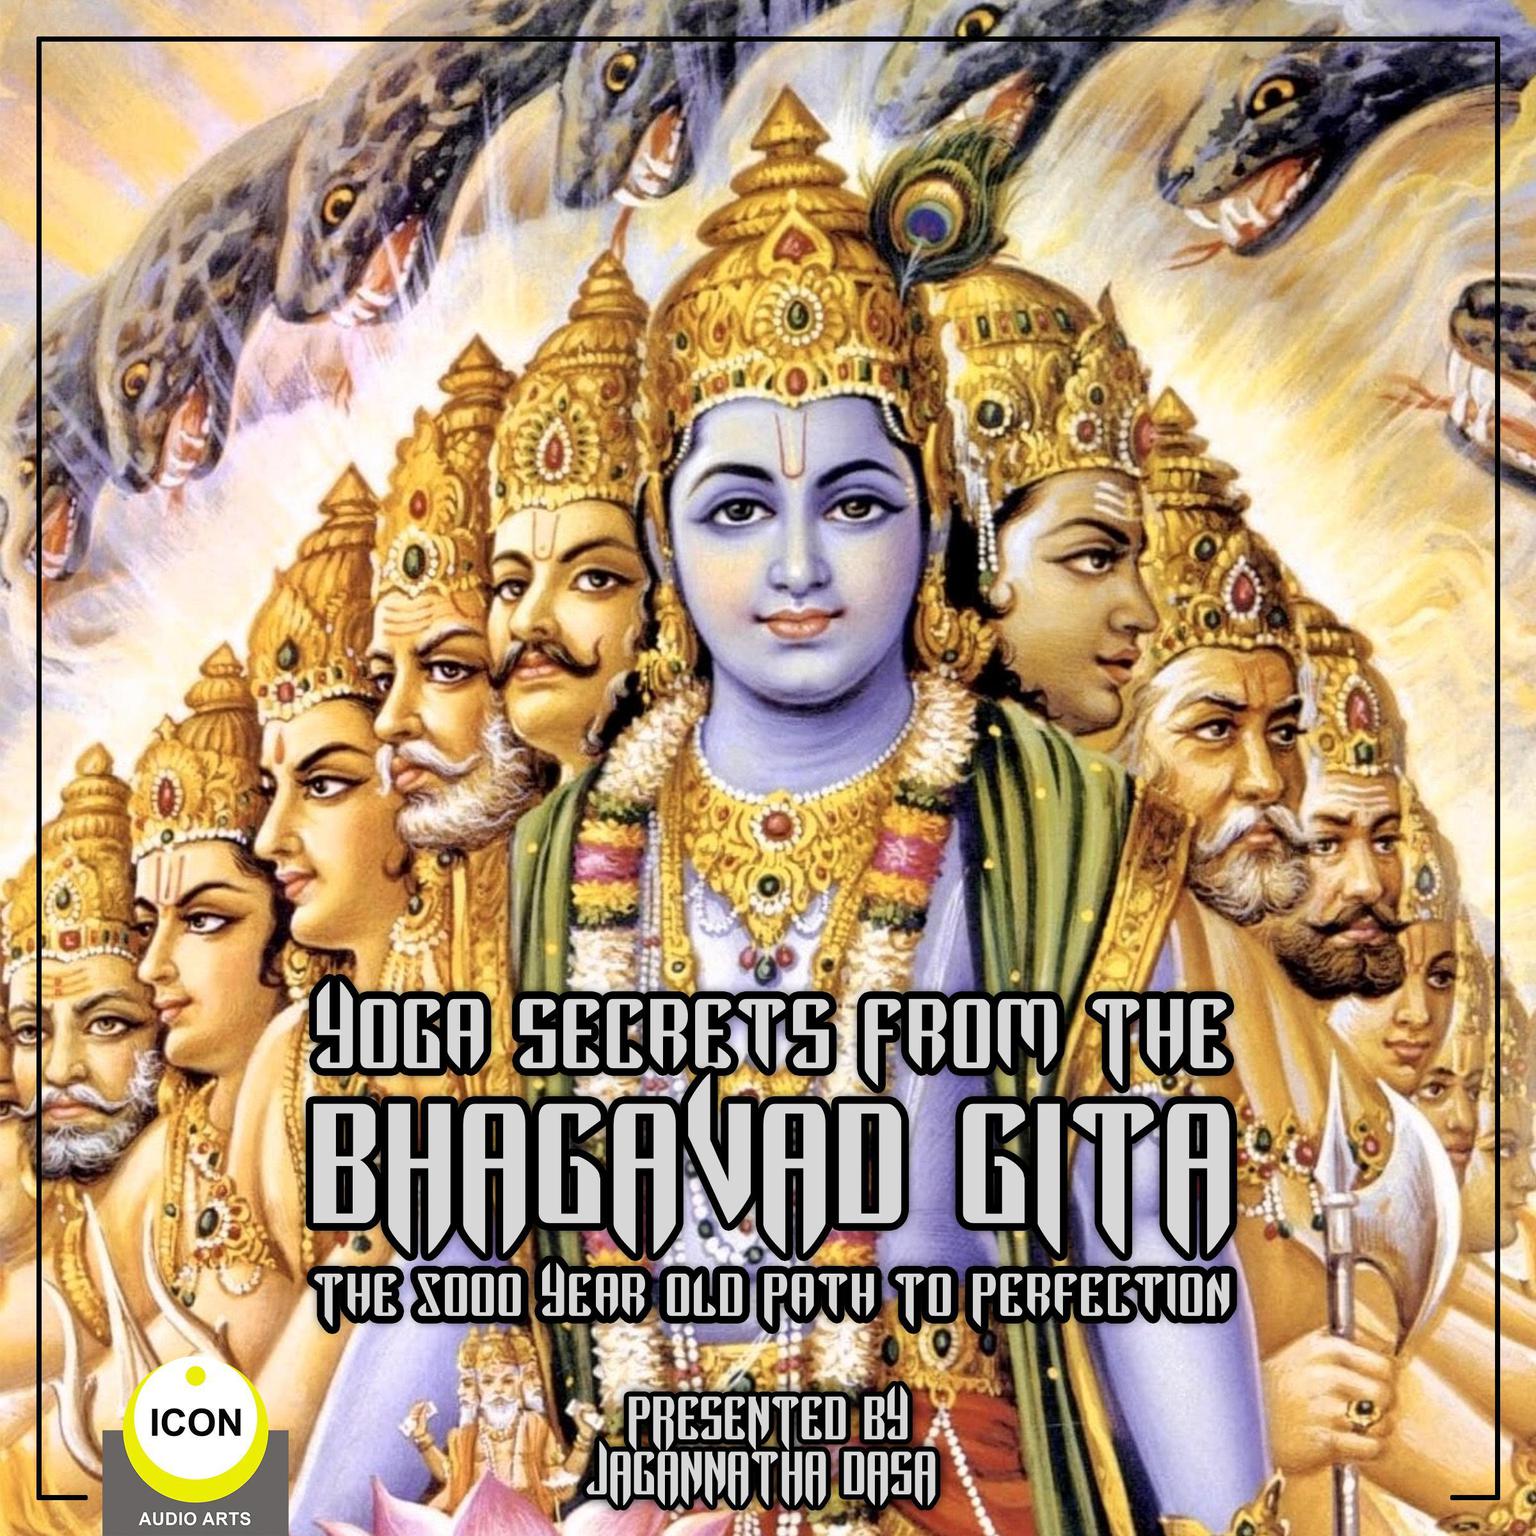 Yoga Secrets From The Bhagavad Gita - The 5000 Year Old Path To Perfection Audiobook, by unknown